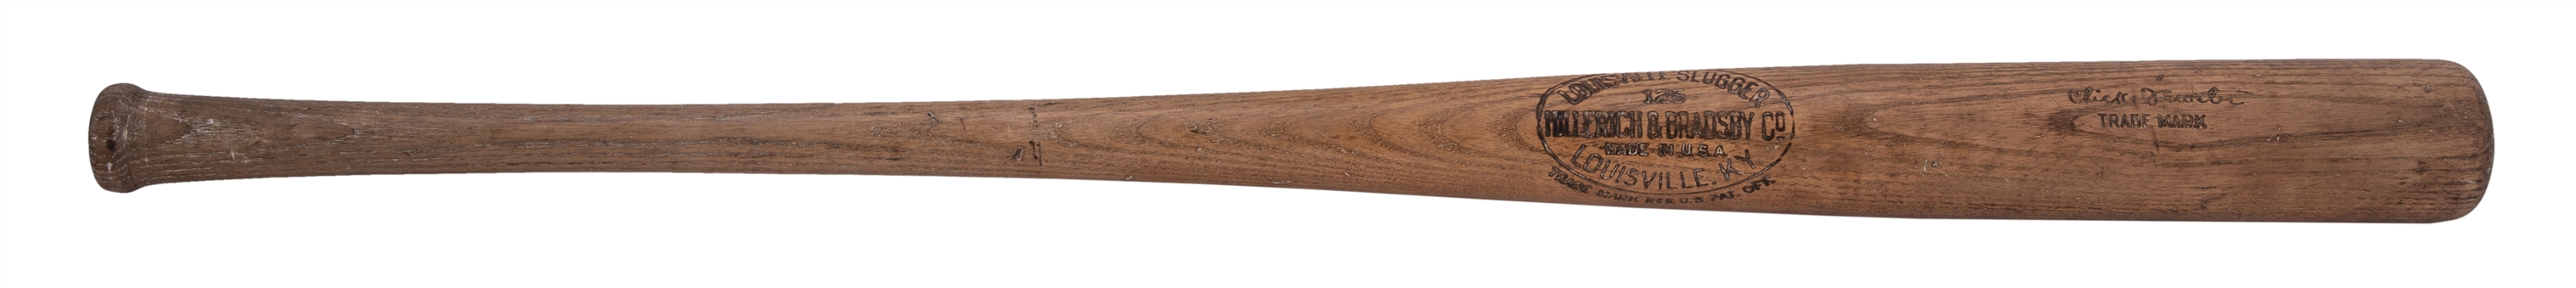 1925-28 Chick Fewster Game Used Hillerich & Bradsby Professional Model Bat (PSA/DNA GU 8, MEARS)